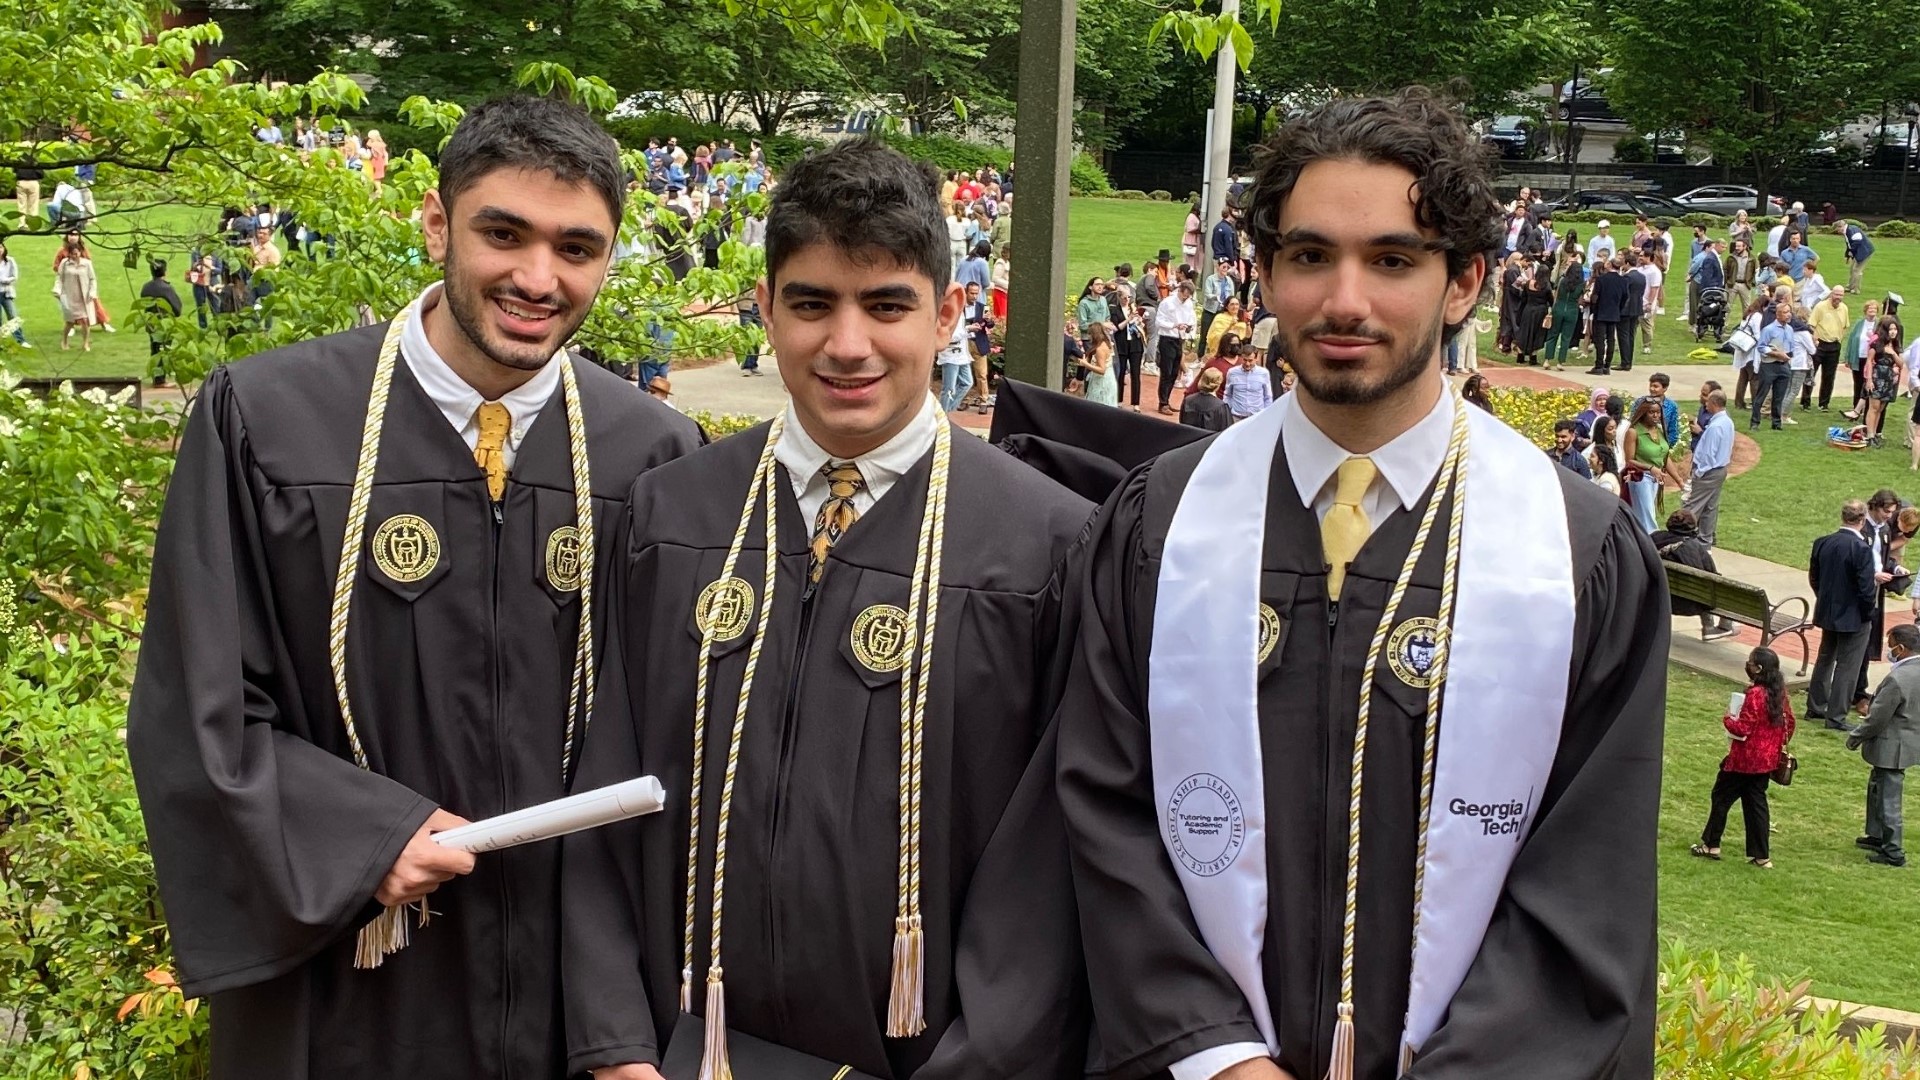 In 2019, the triplets became the first-ever co-valedictorians at West Forsyth High School when they were 16-years-old.